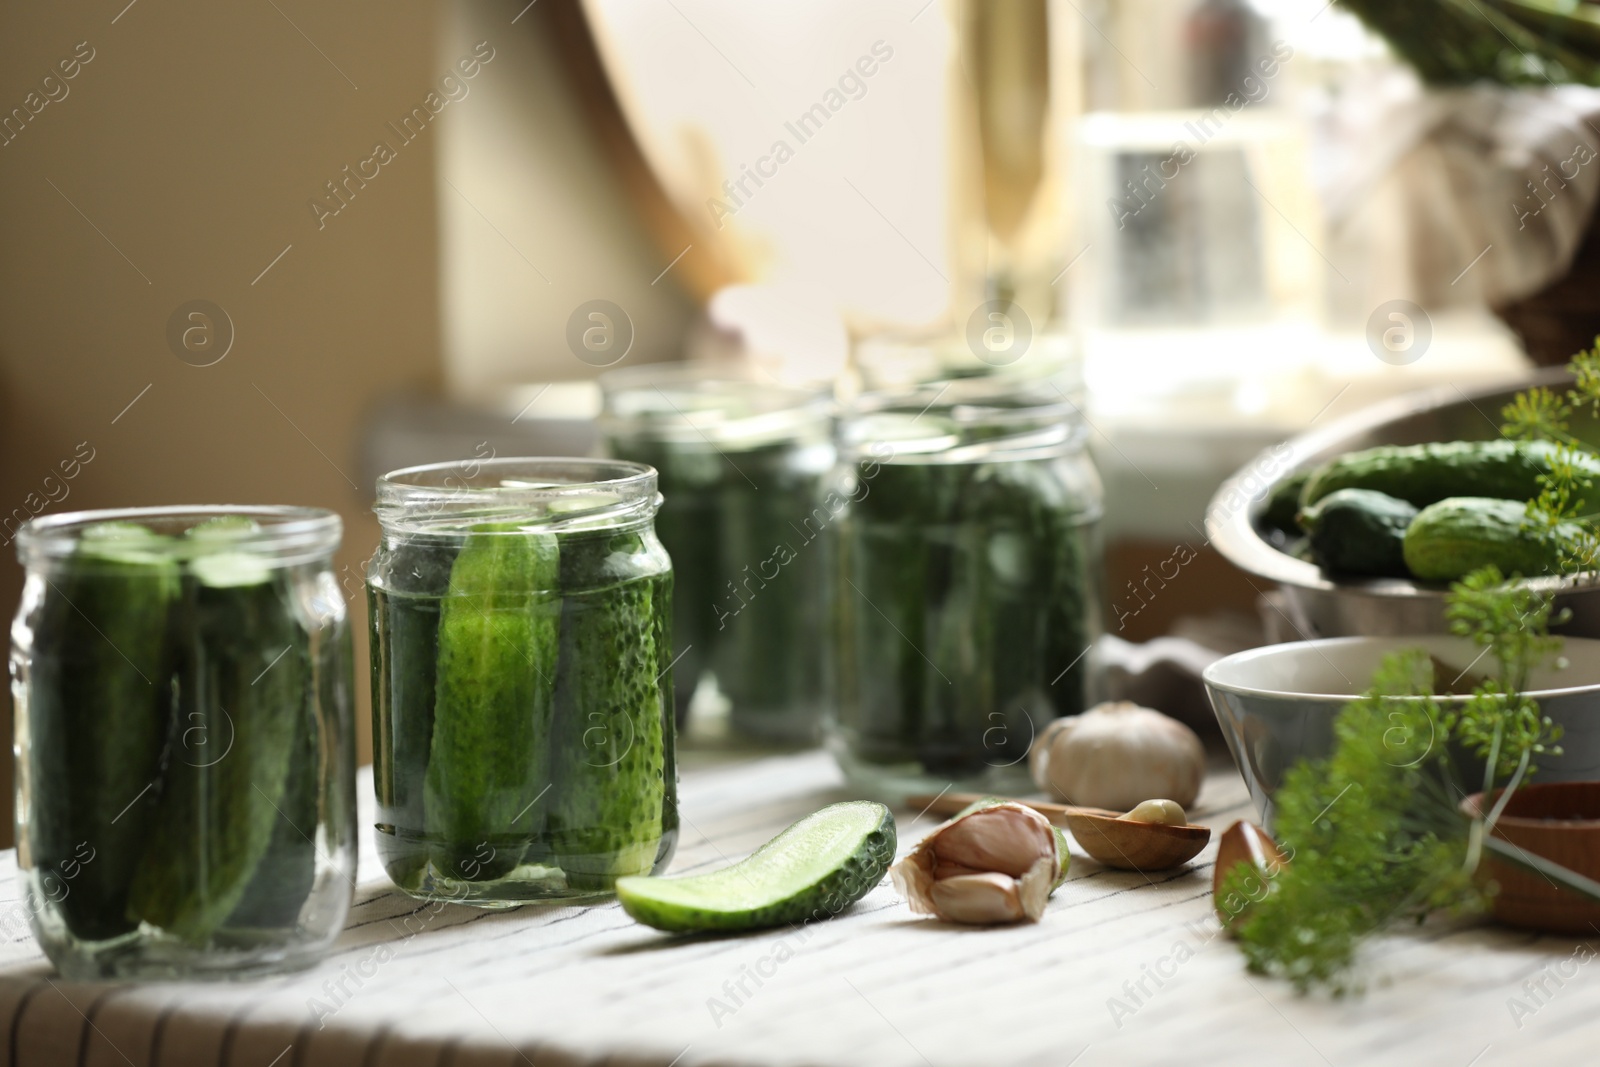 Photo of Glass jars with fresh cucumbers and other ingredients on table indoors. Canning vegetables